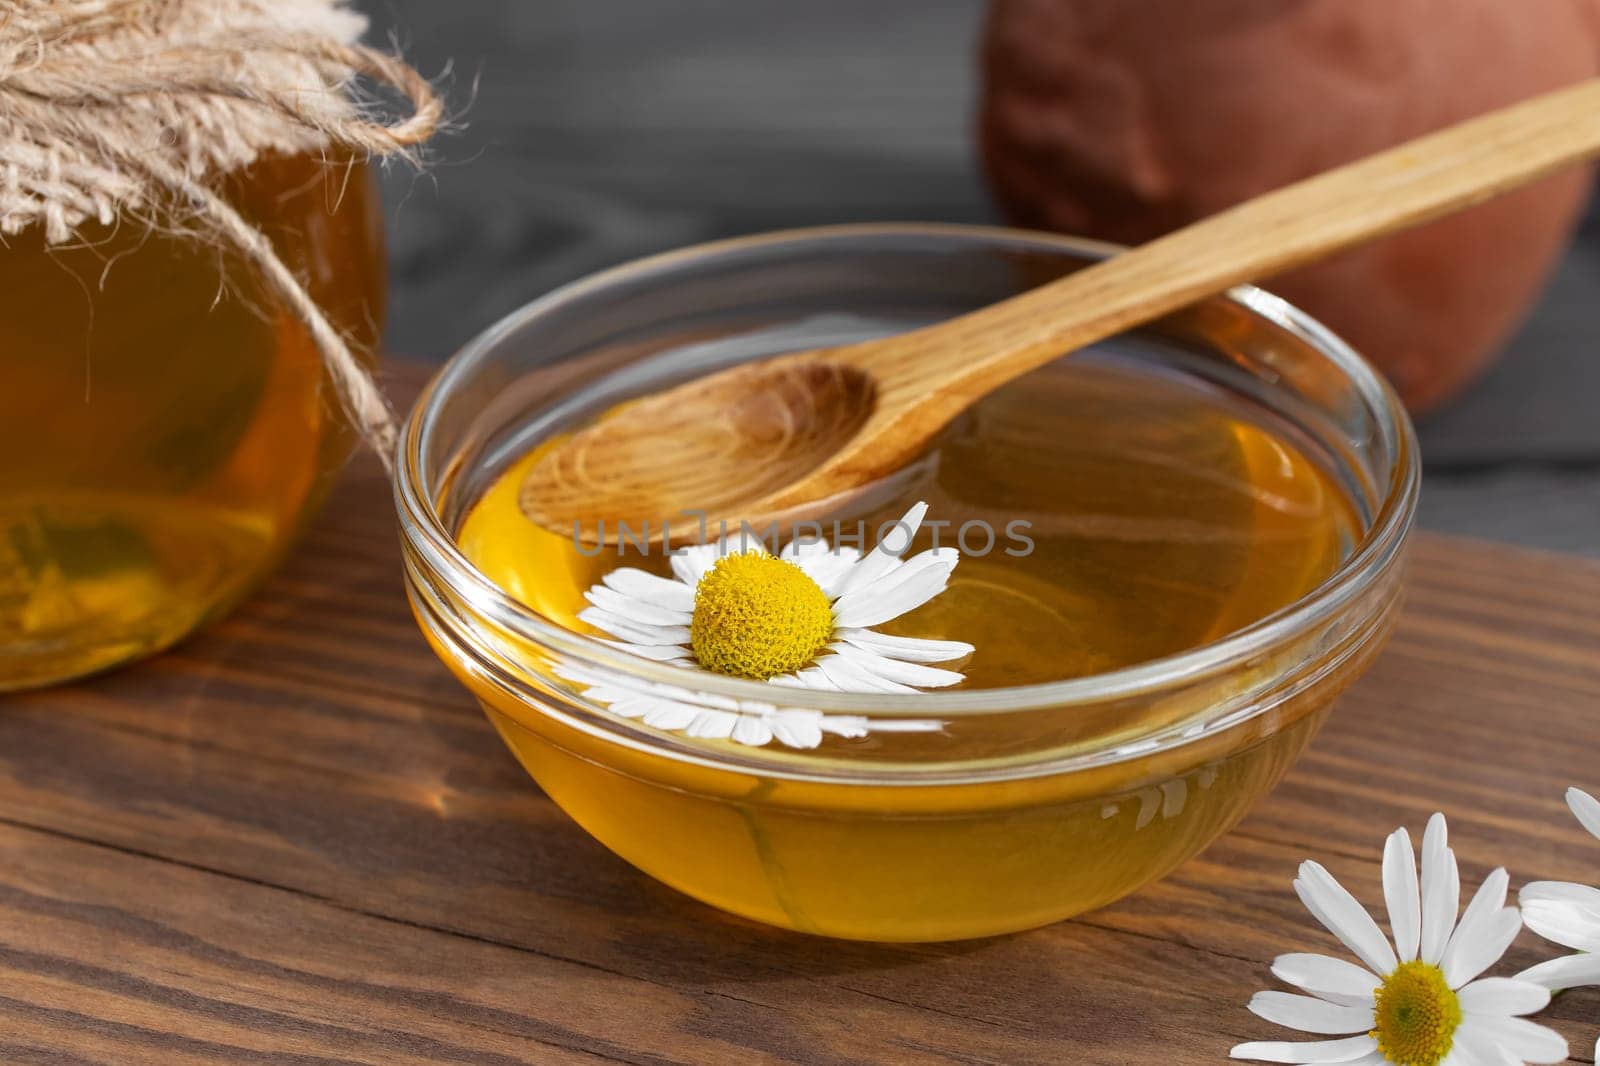 Chamomile syrup in a small bowl and in a jar on a wooden table.